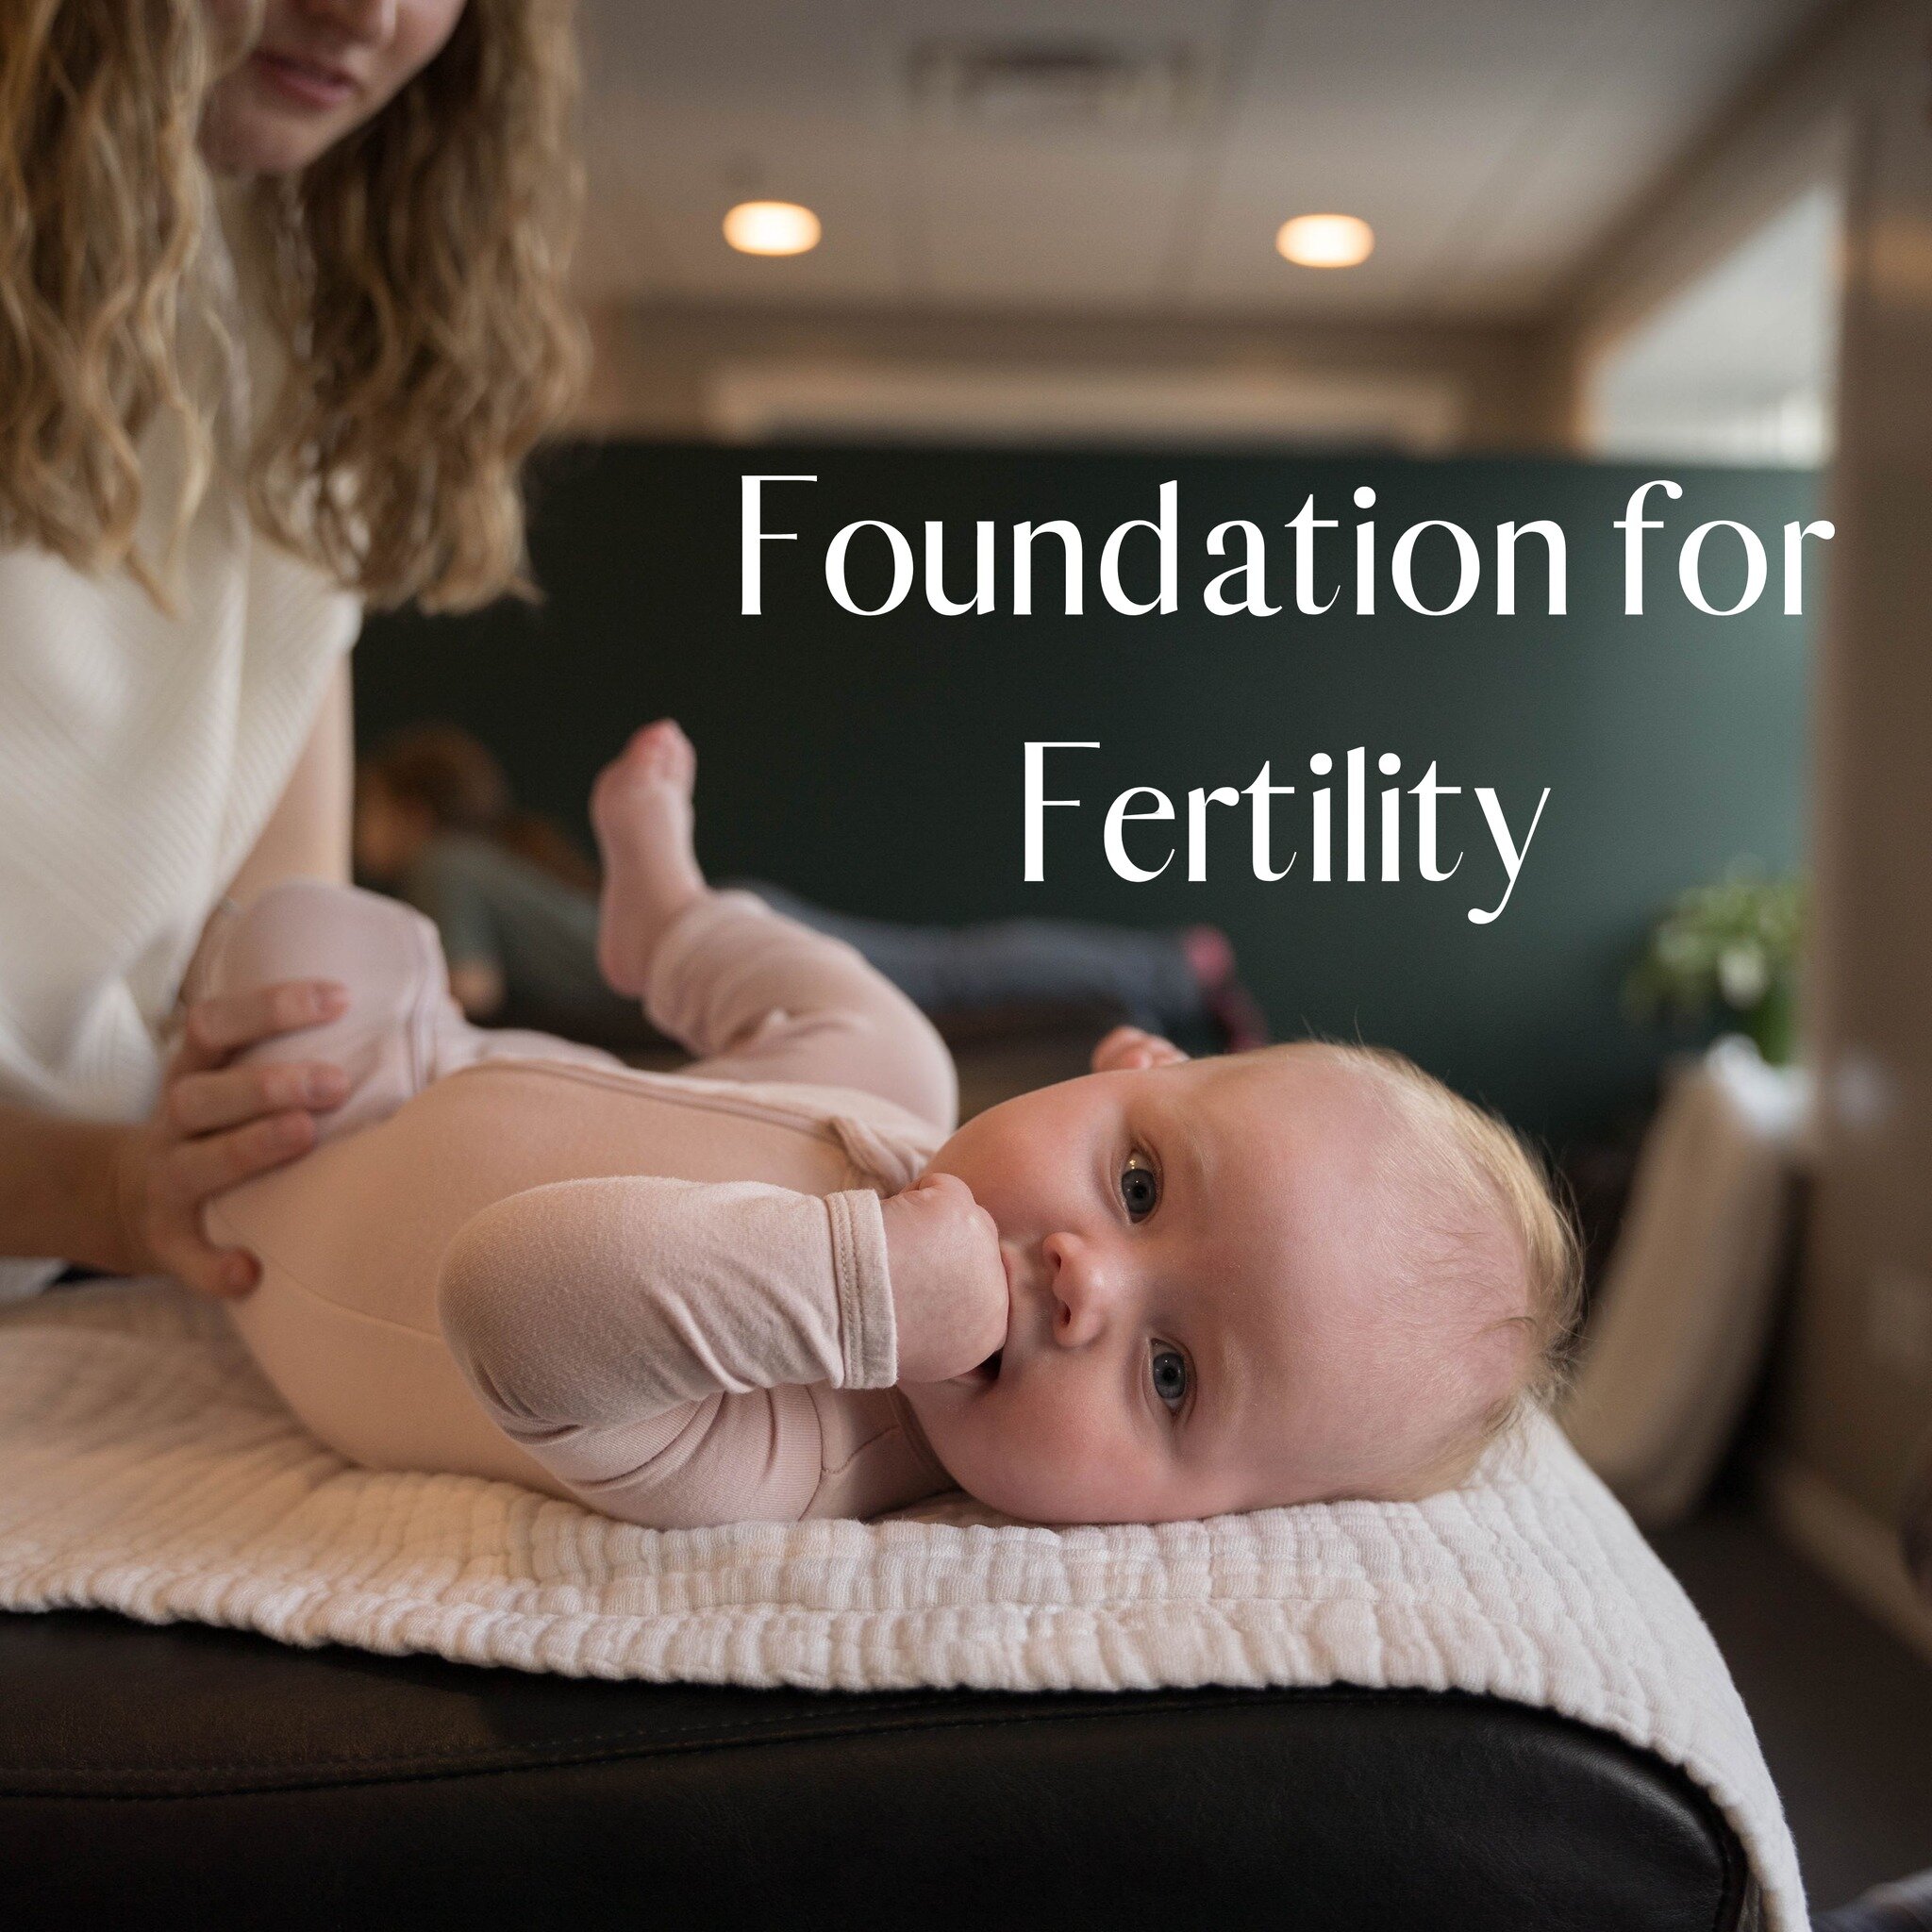 ✨Did you know that chiropractic care can positively impact your fertility? ✨

When your nervous system is well-regulated, it supports healing, restoration, and proper endocrine (hormonal) function! Chiropractic care is supportive of fertility by help